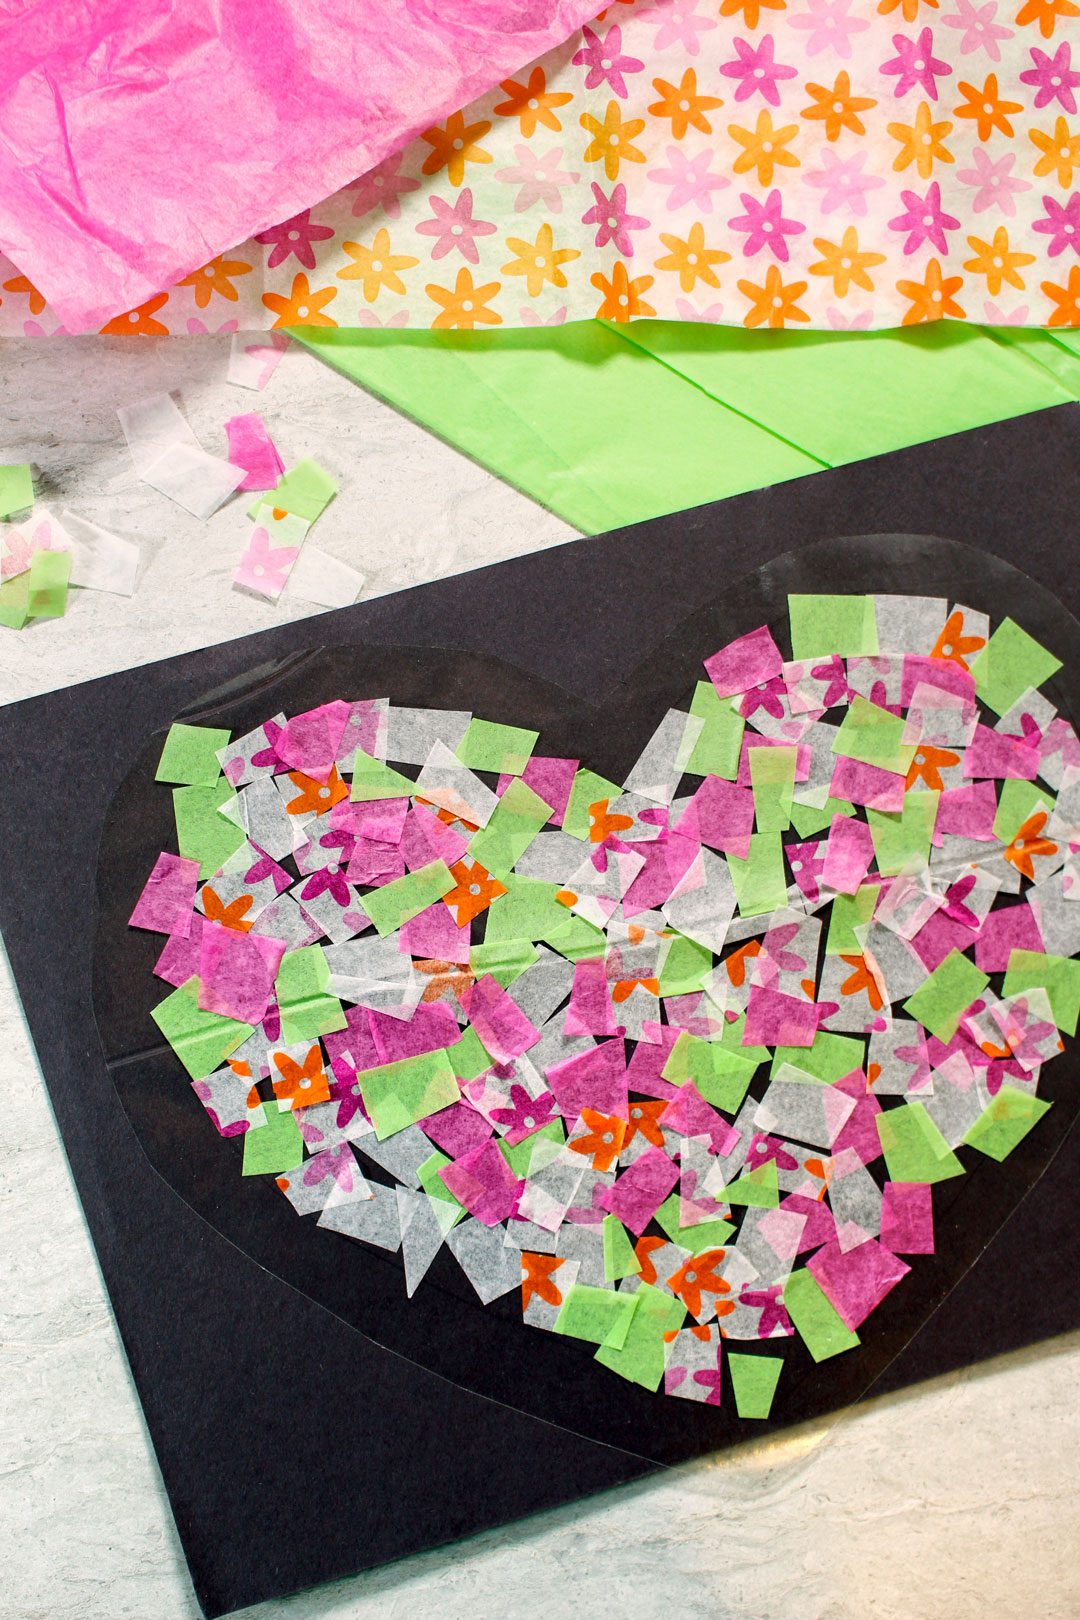 Pink, green, and white tissue paper attached to contact paper in a heart shape.